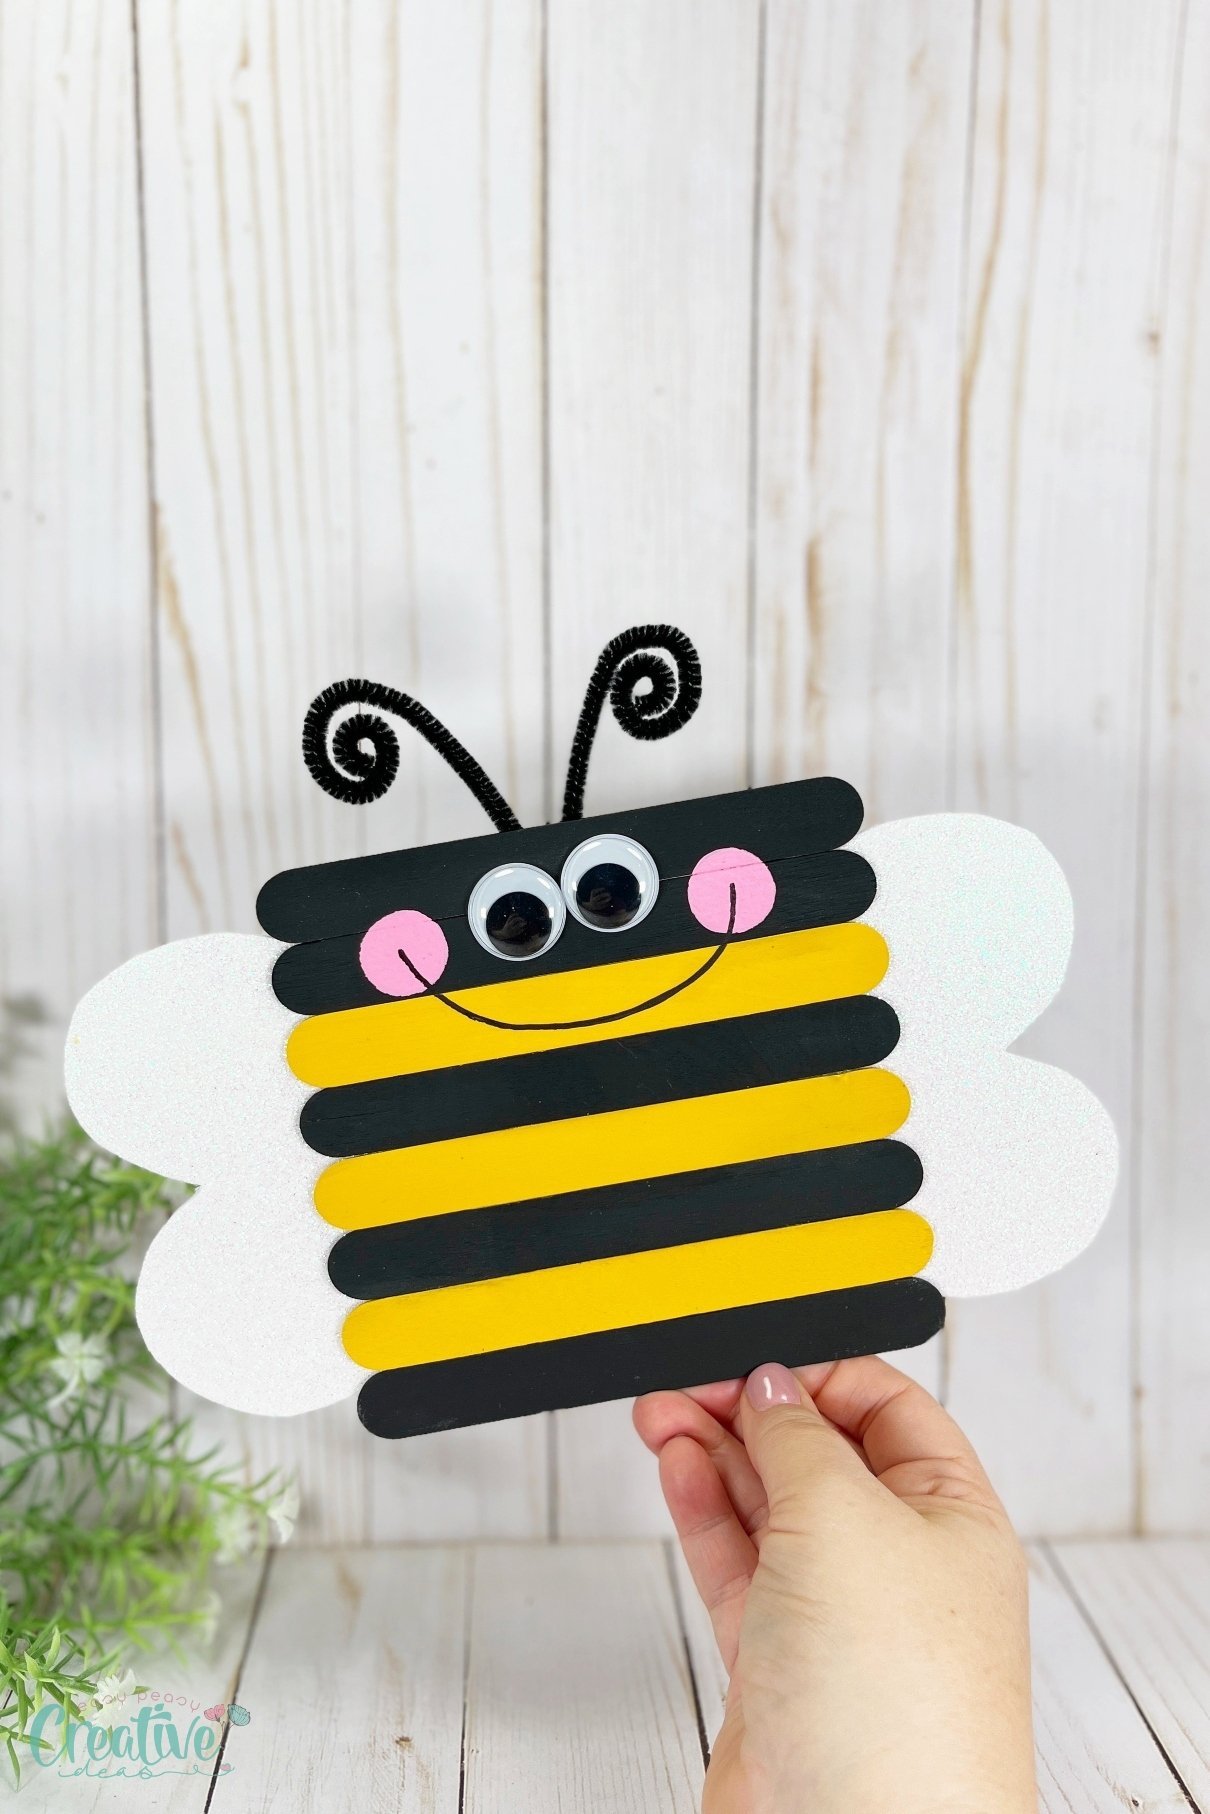 Create adorable bee decorations using simple materials and step-by-step instructions. Let your imagination soar as you bring these charming bees to life! Enjoy the crafting experience!